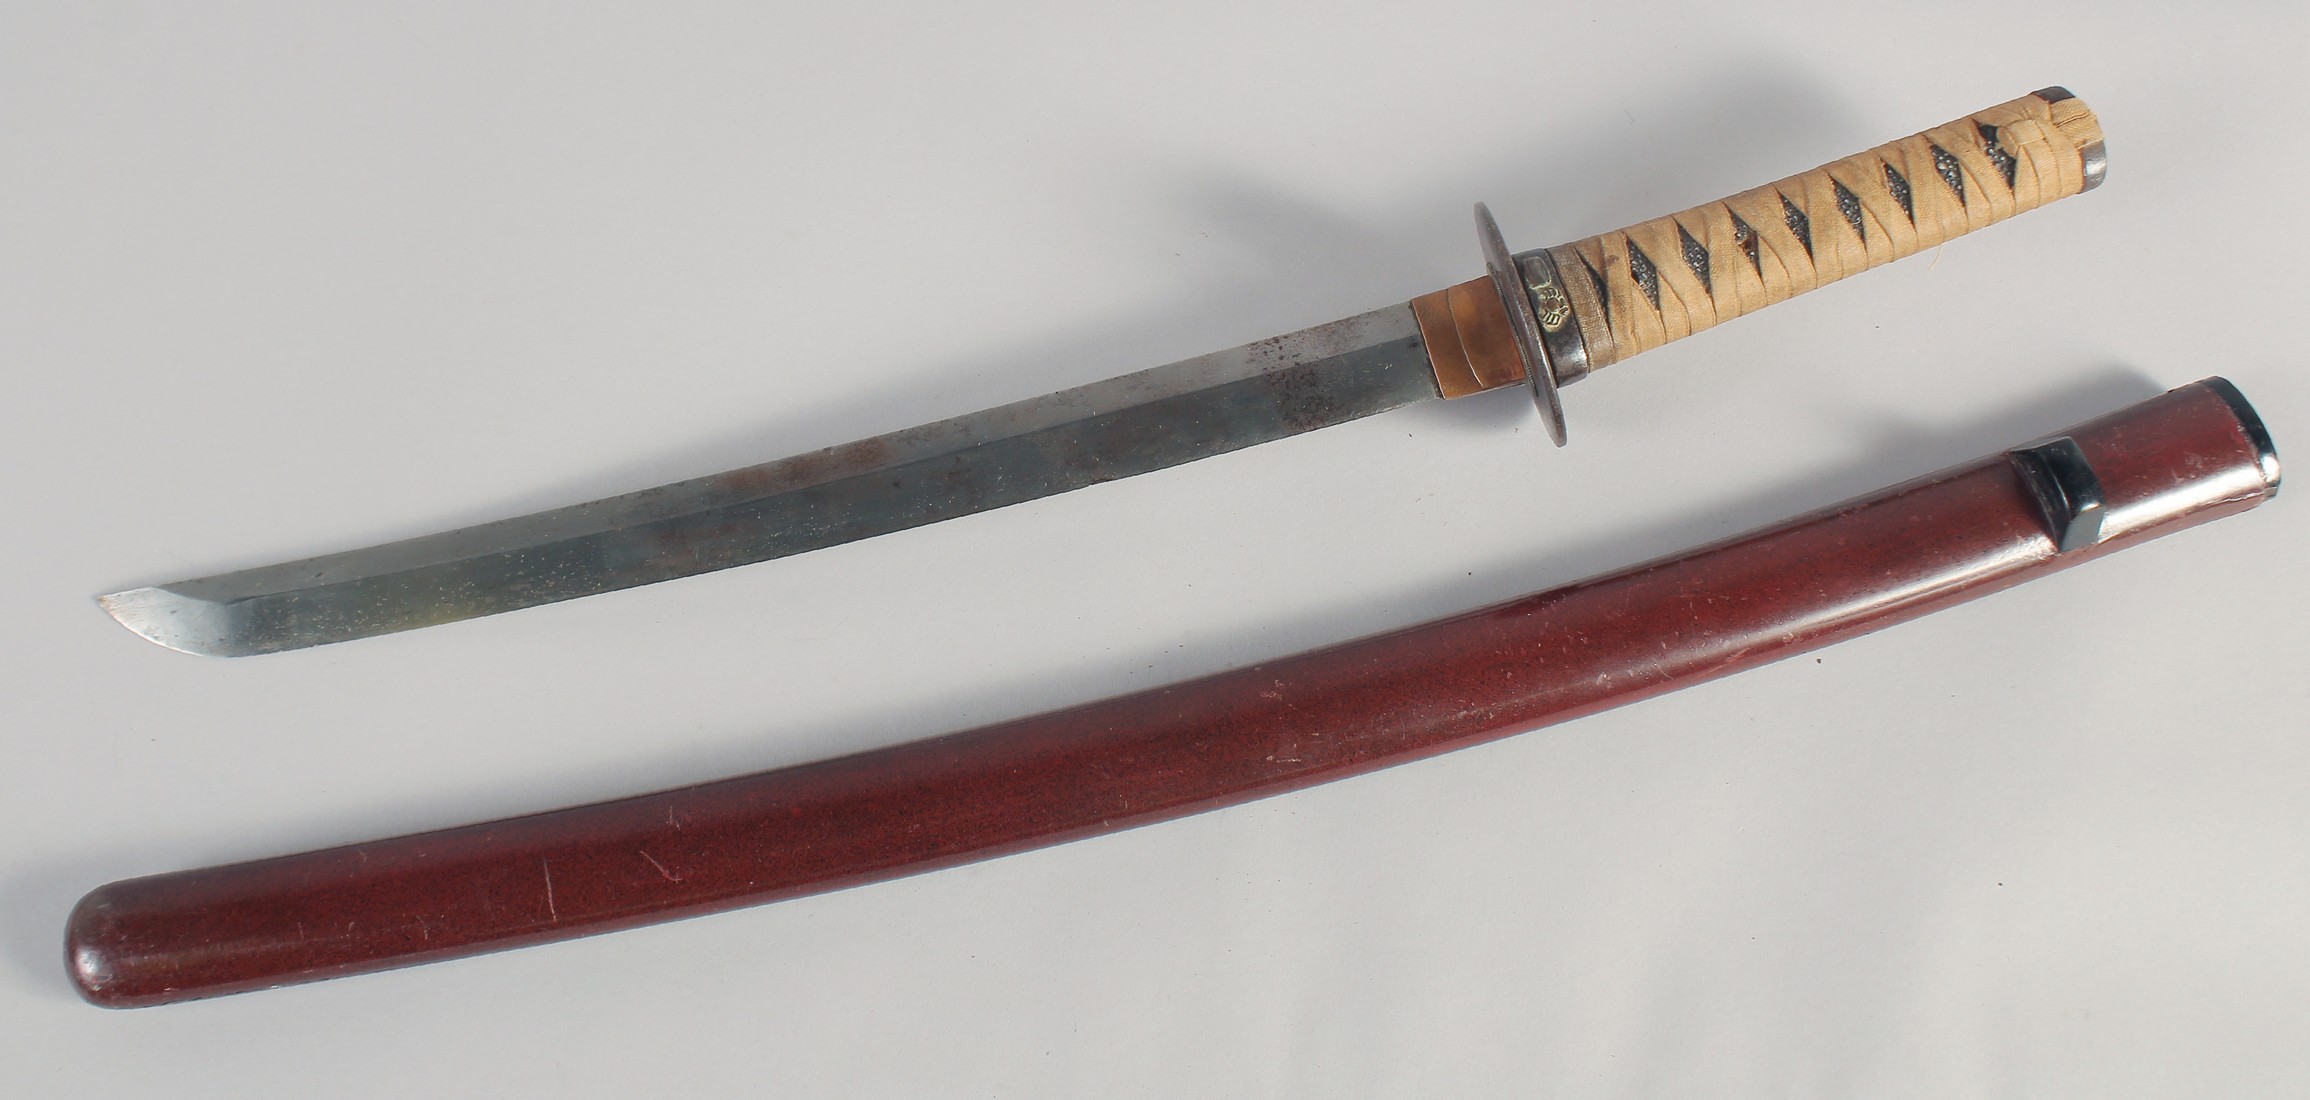 A LATE 19TH - EARLY 20TH CENTURY APANESE WAKIZASHI, with cord bound grip, gold inlaid steel tsuba in